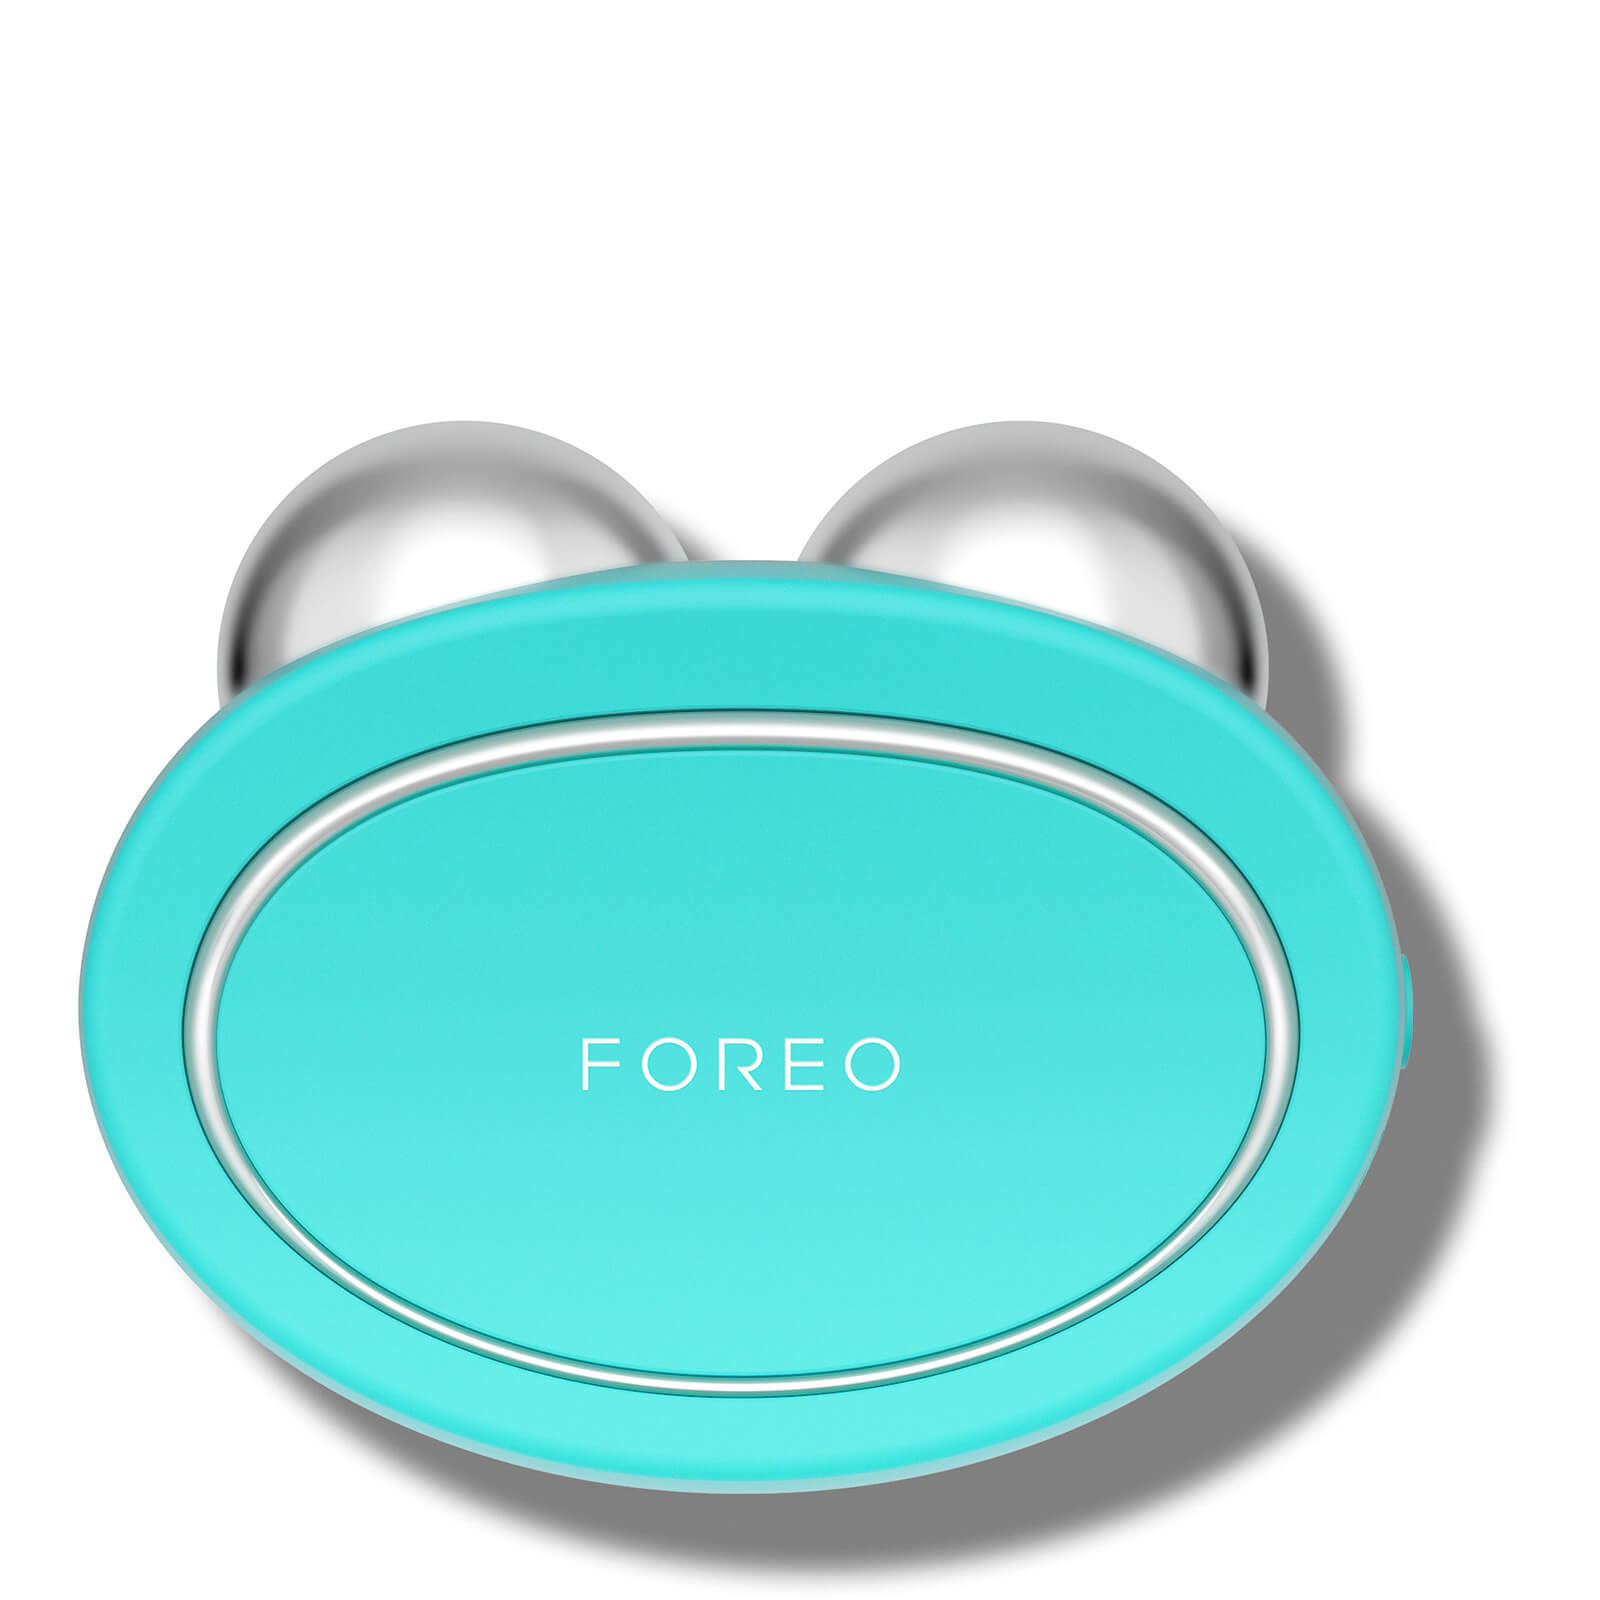 FOREO Bear Microcurrent Facial Toning Device With 5 Intensities (Διάφορες αποχρώσεις) - Mint